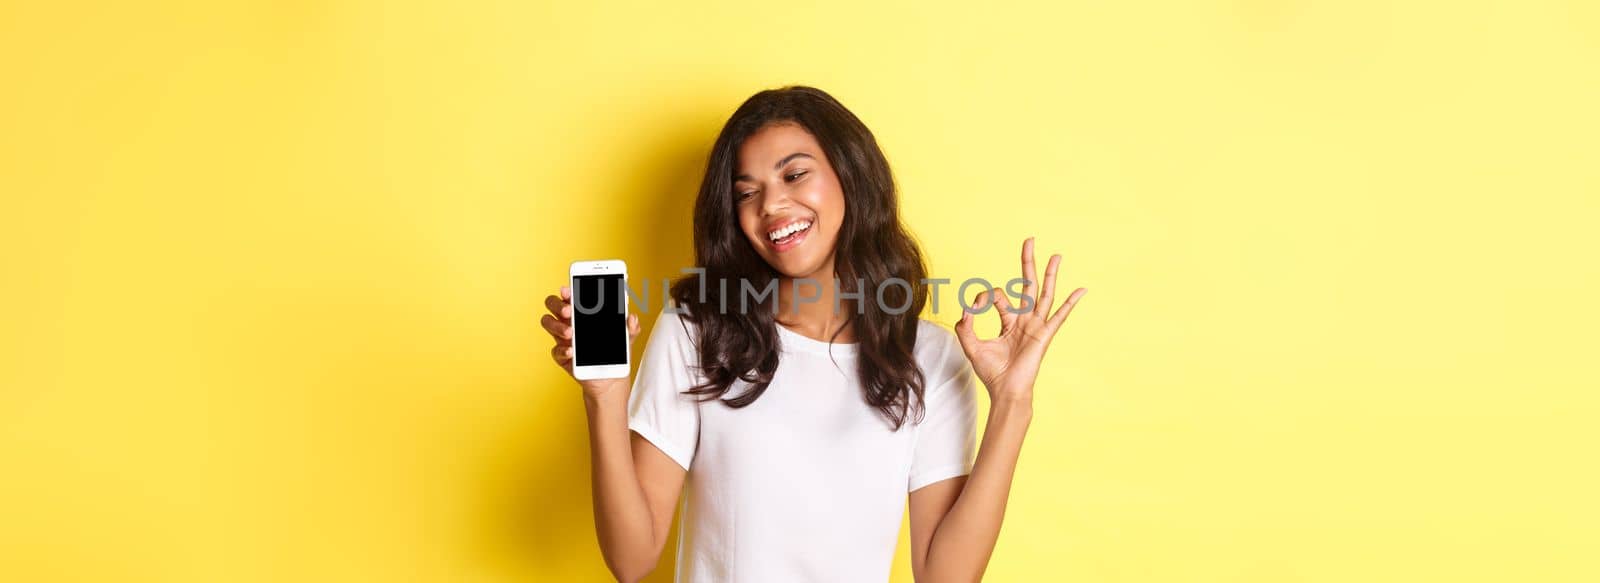 Portrait of cute african-american girl smiling pleased, showing okay sign and mobile phone screen, recommending an app or promo, standing over yellow background.